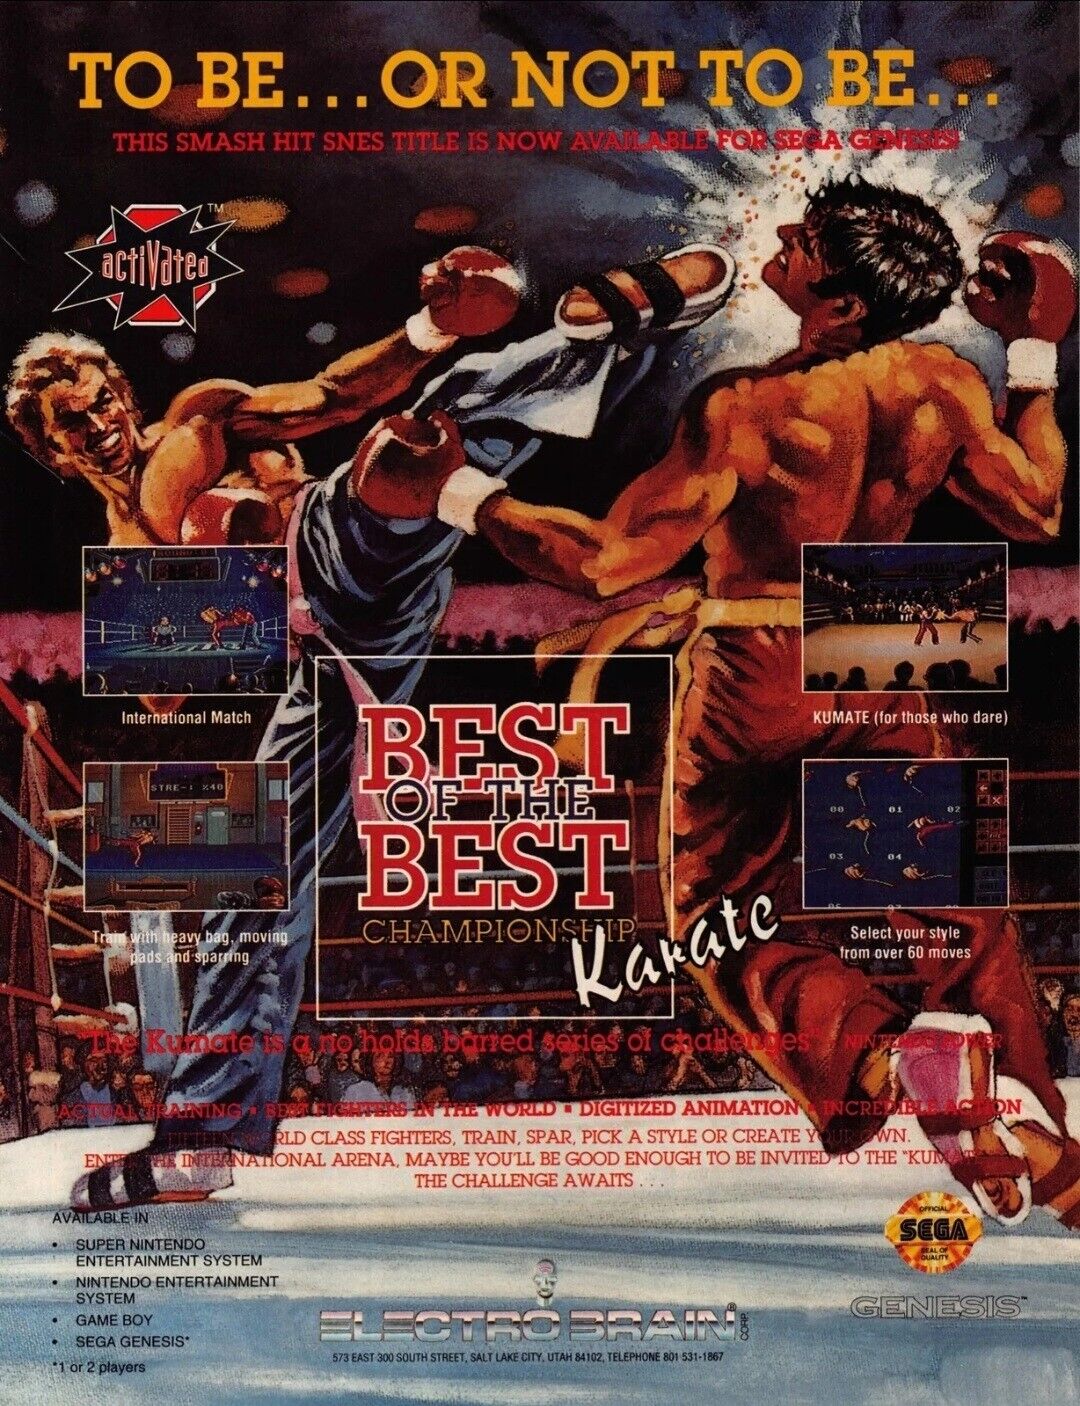 Best of the Best Championship Karate Video Game 1990 Print Advertisement 1993 🔥